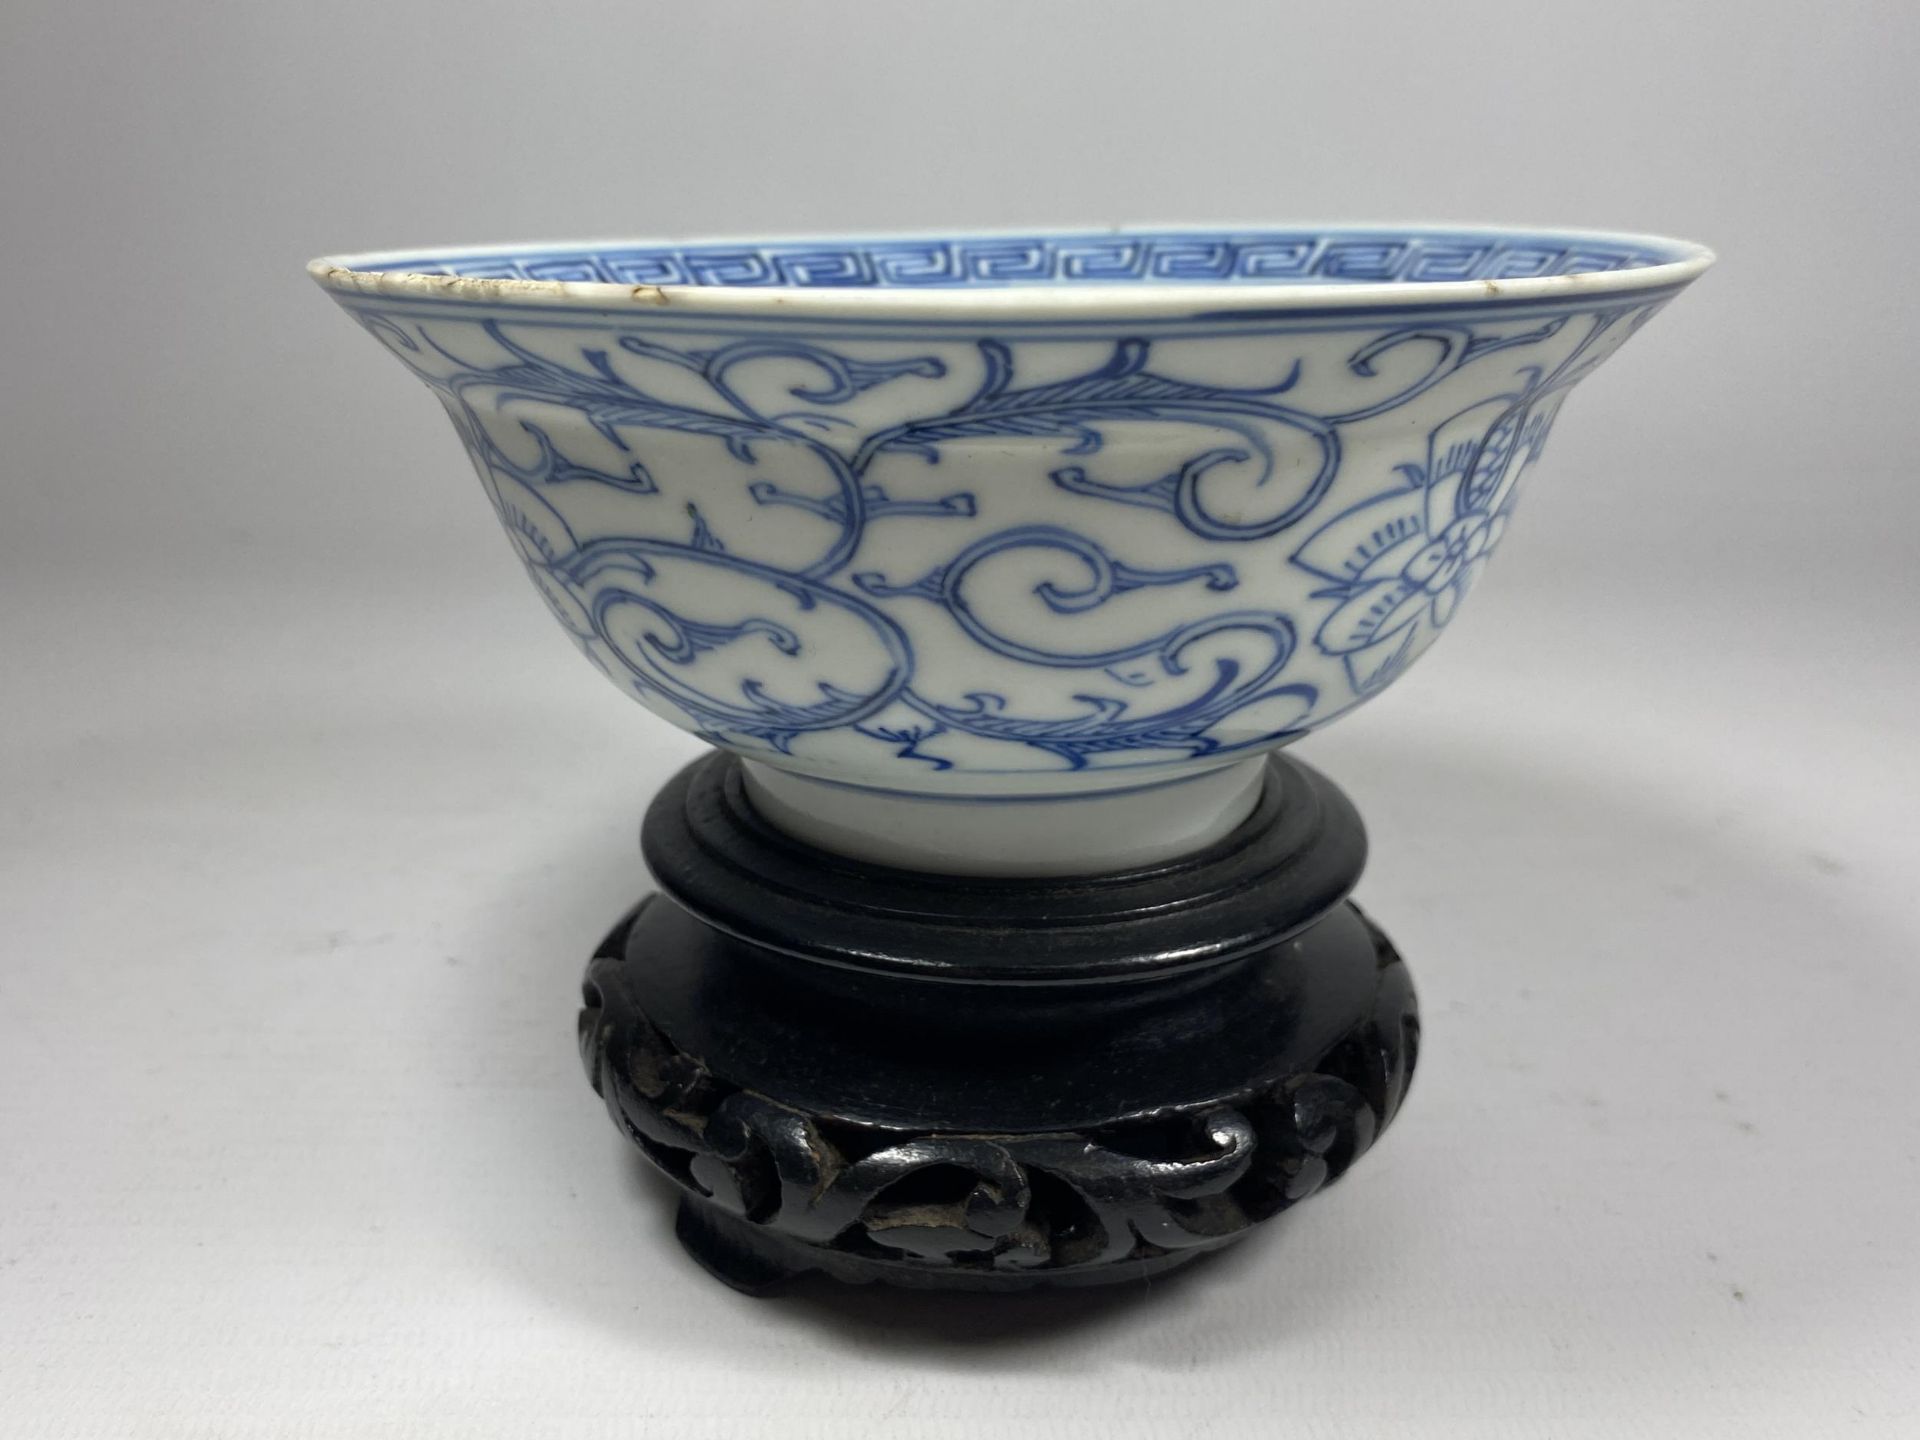 A MID-LATE 19TH CENTURY CHINESE QING TONGZHI PERIOD (1862-1874) BLUE & WHITE PORCELAIN BOWL ON - Image 4 of 8